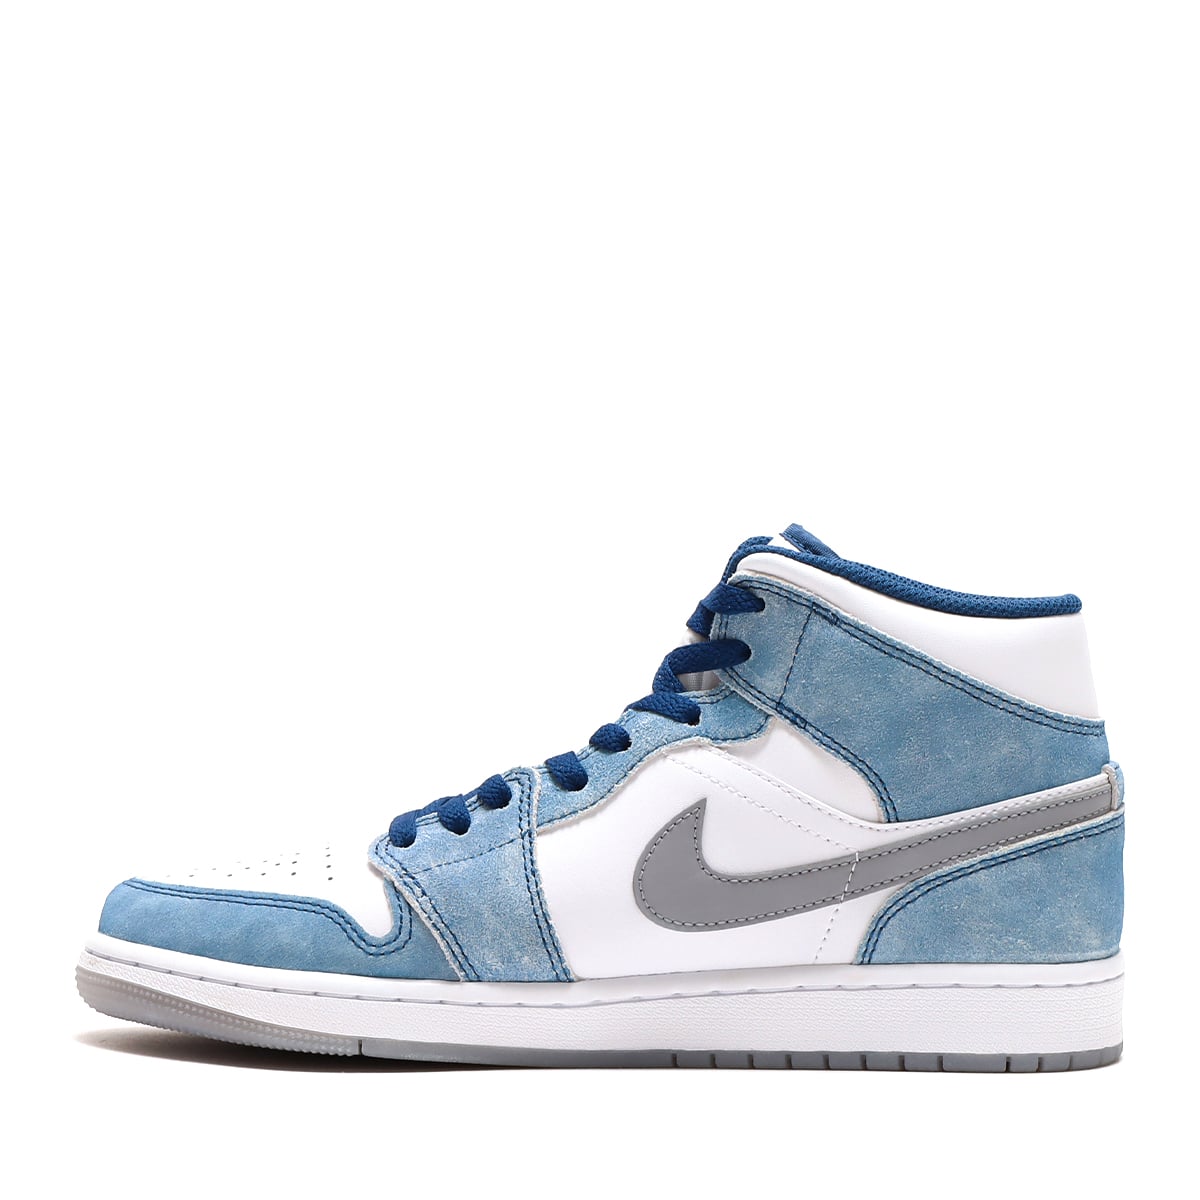 Air Jordan 1 Mid "French Blue Fire Red"